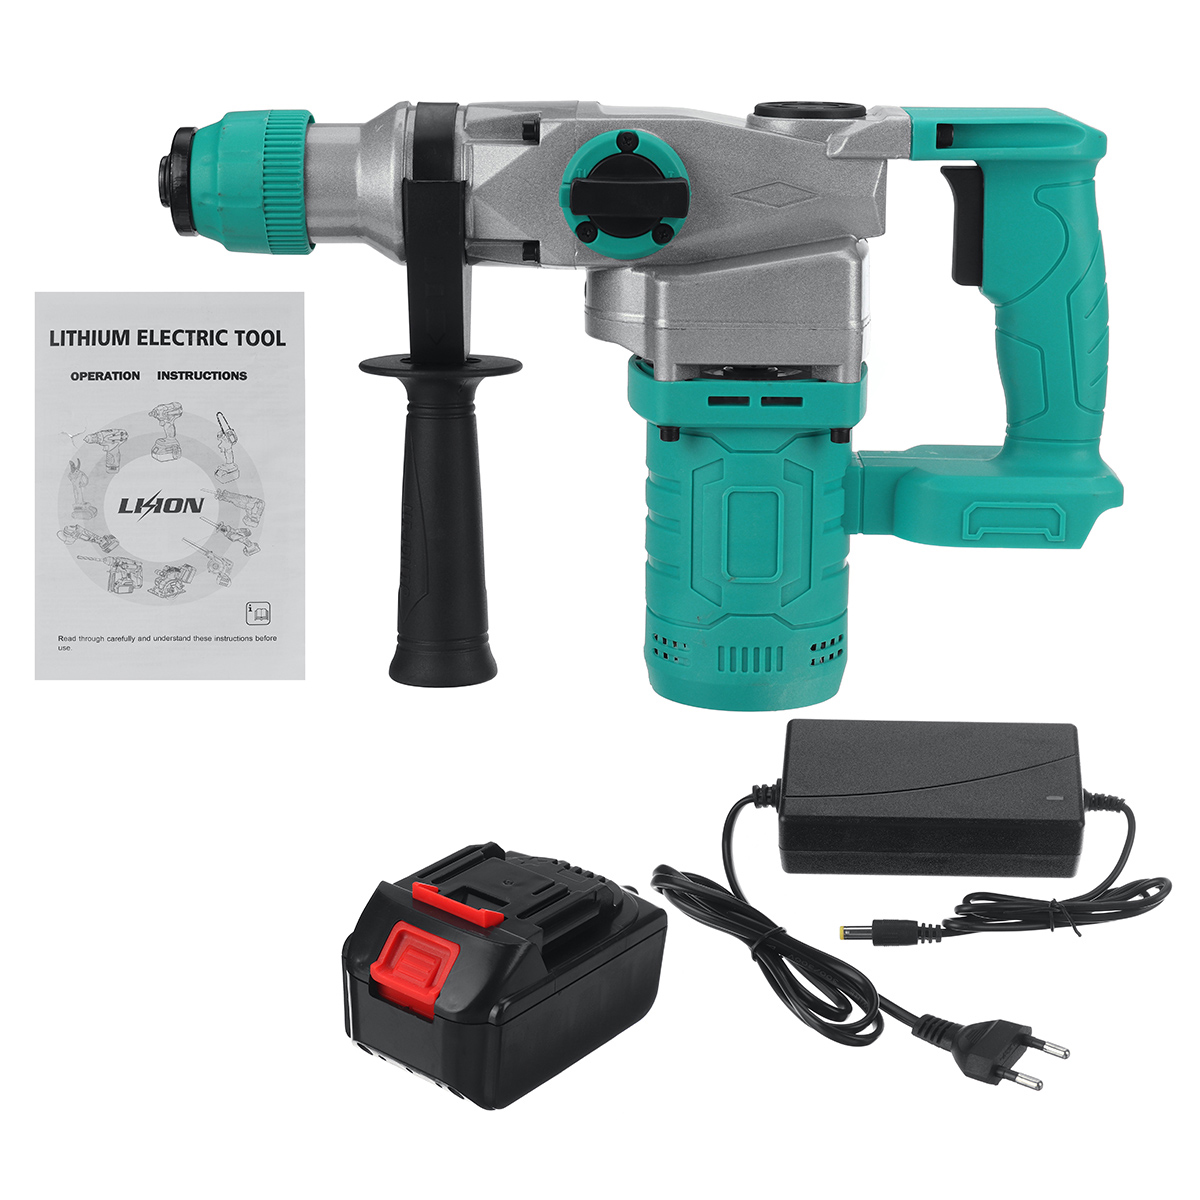 Brushless-Cordless-Electric-Hammer-Drill-Wood-Concrete-Wall-Drilling-Slotting-Tool-W-None-or-1pc-Bat-1878668-9